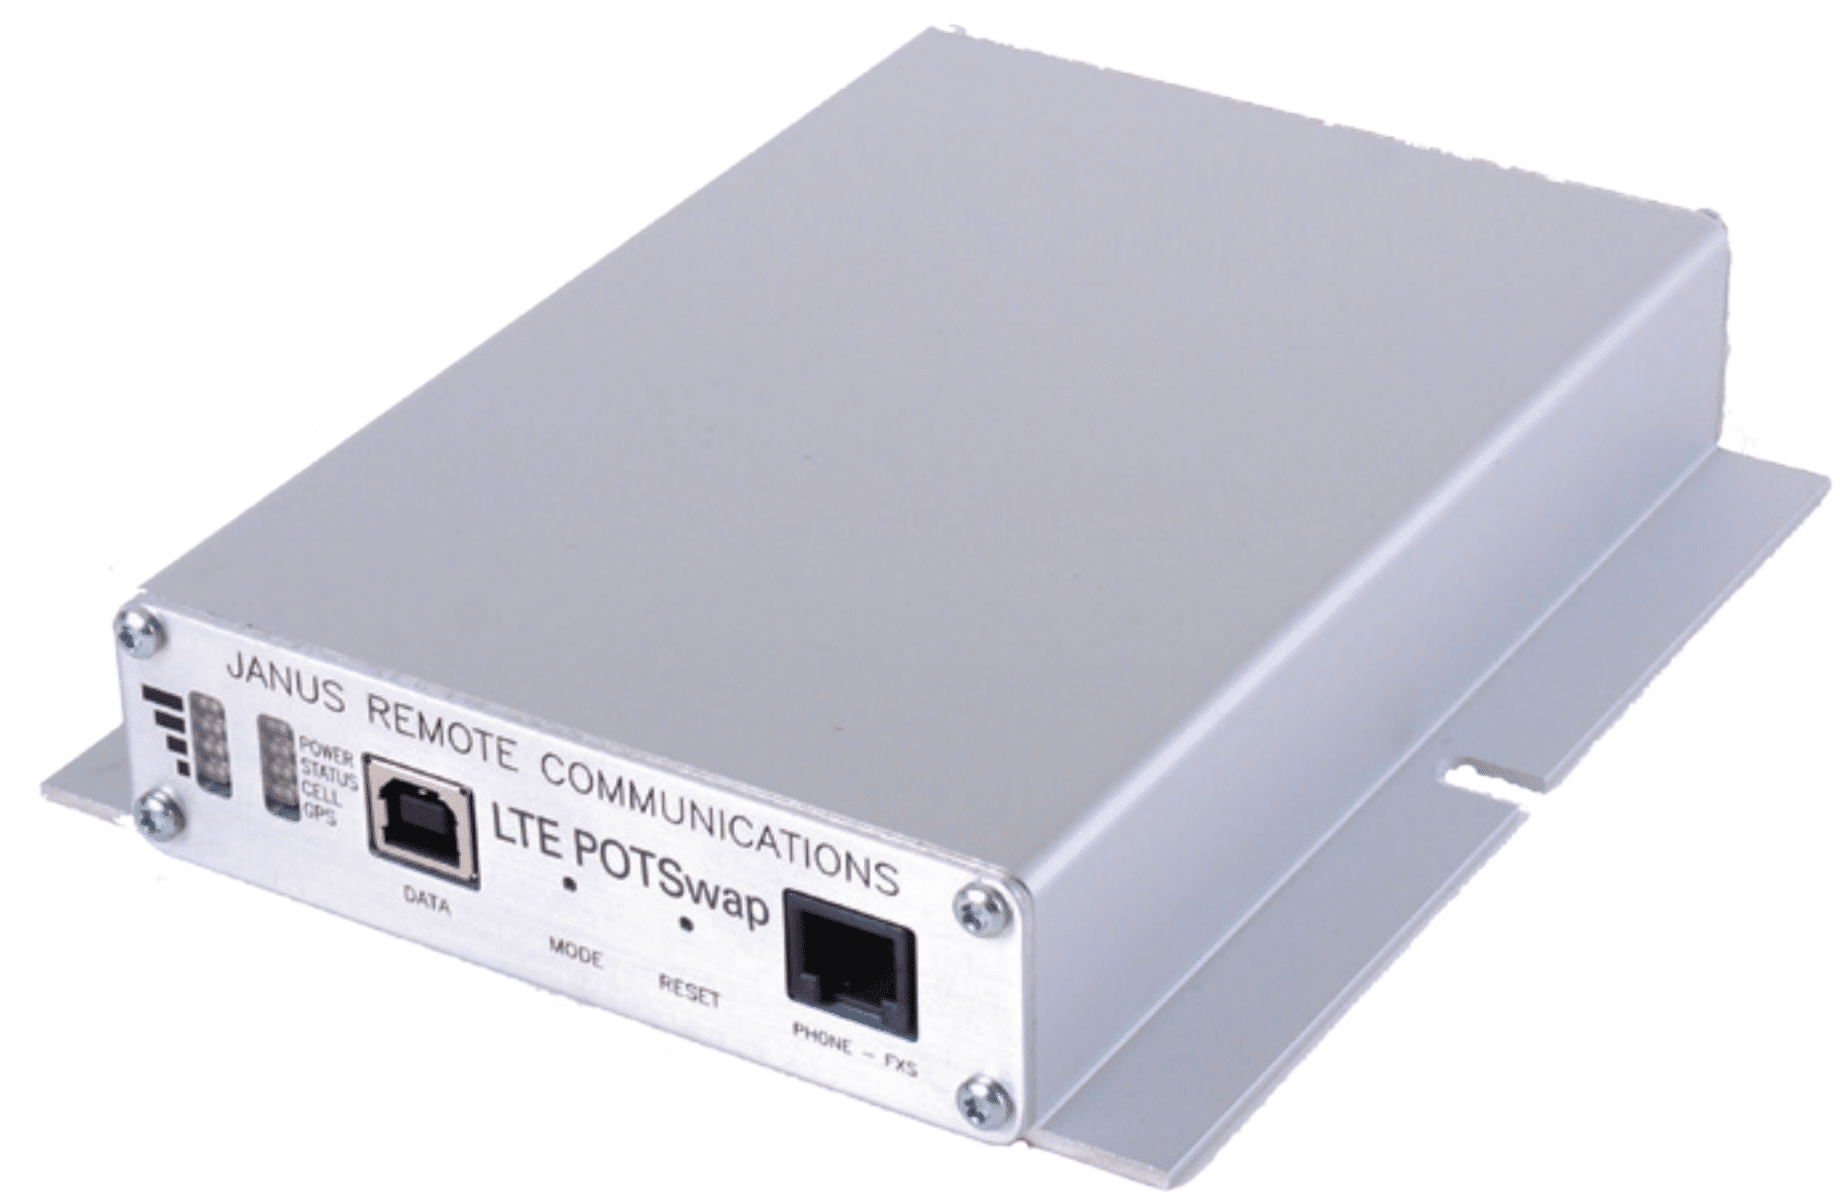 4G LTE Cellular Interface (for Verizon Networks) for Analog Call Stations